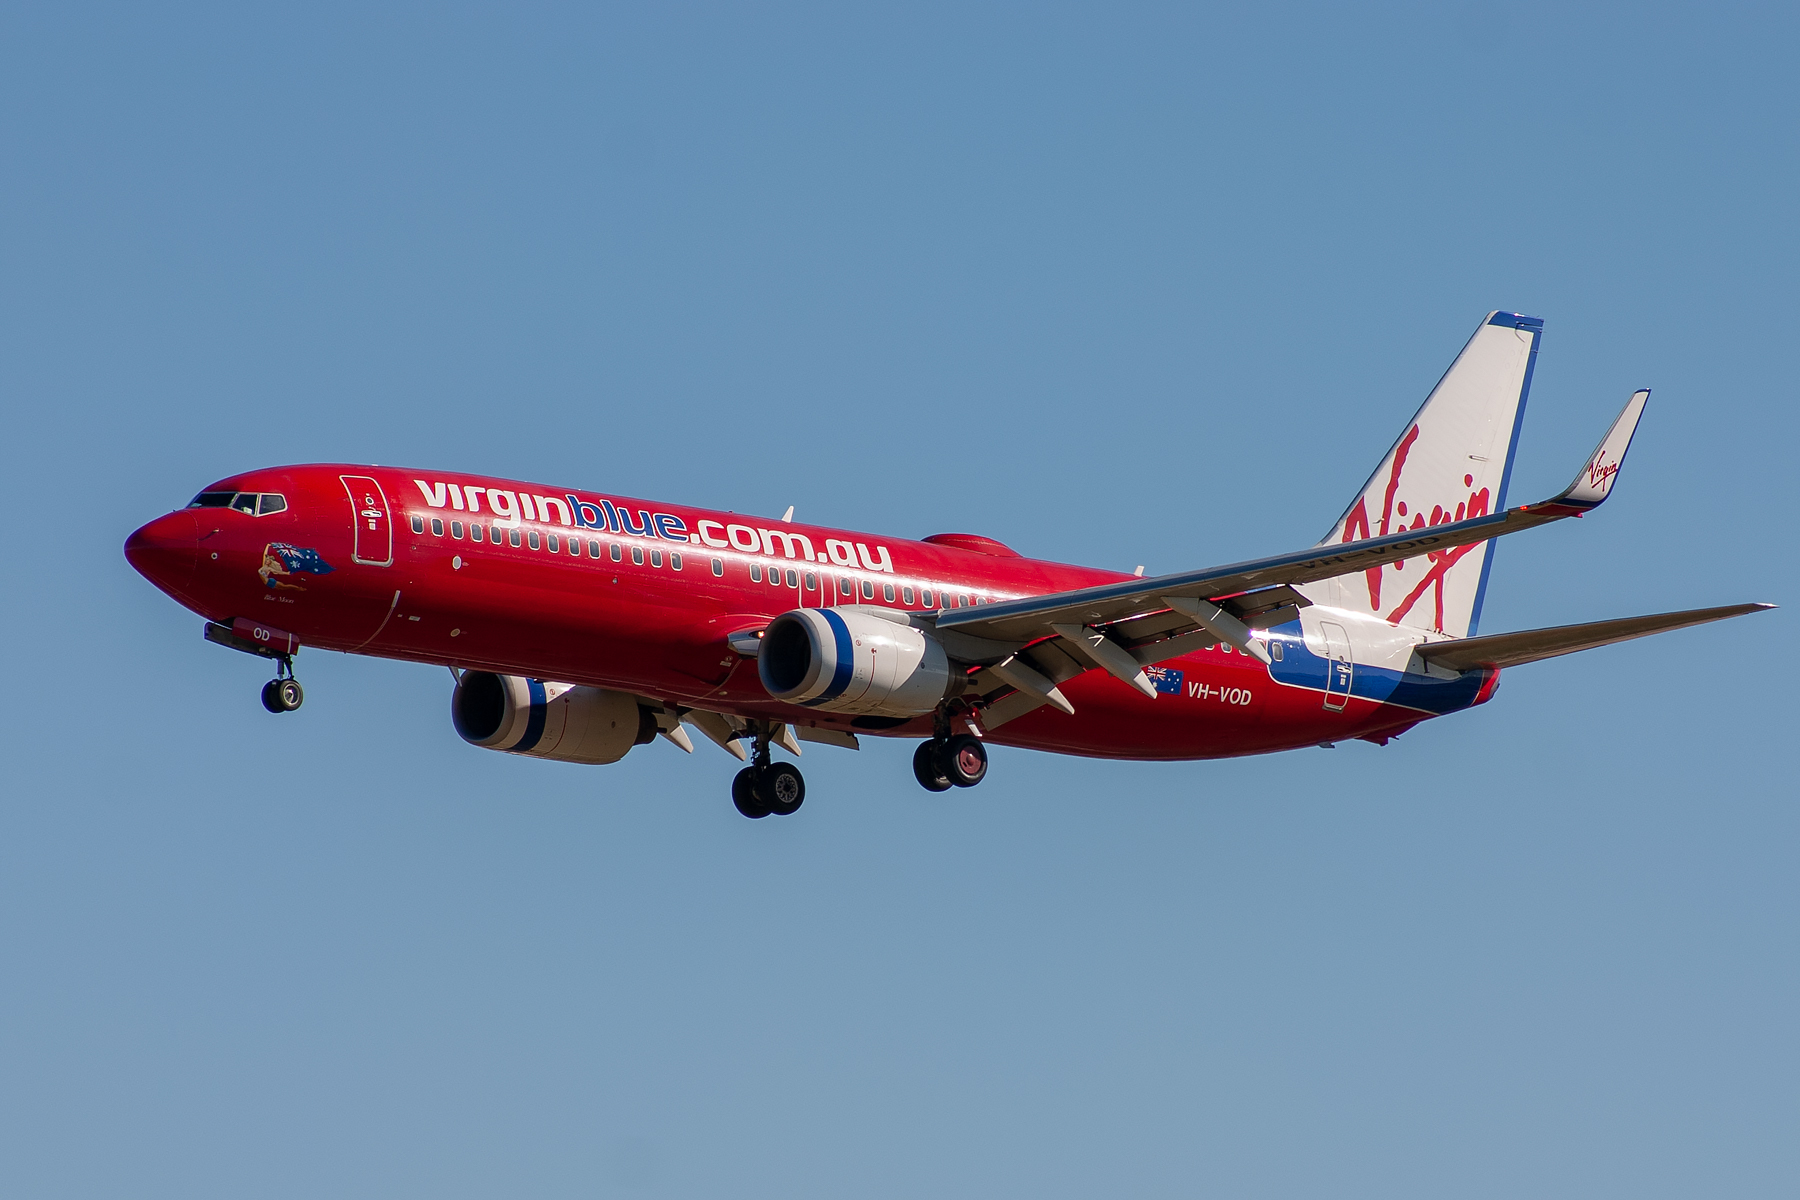 Virgin Blue Airlines Boeing 737-800 VH-VOD at Kingsford Smith